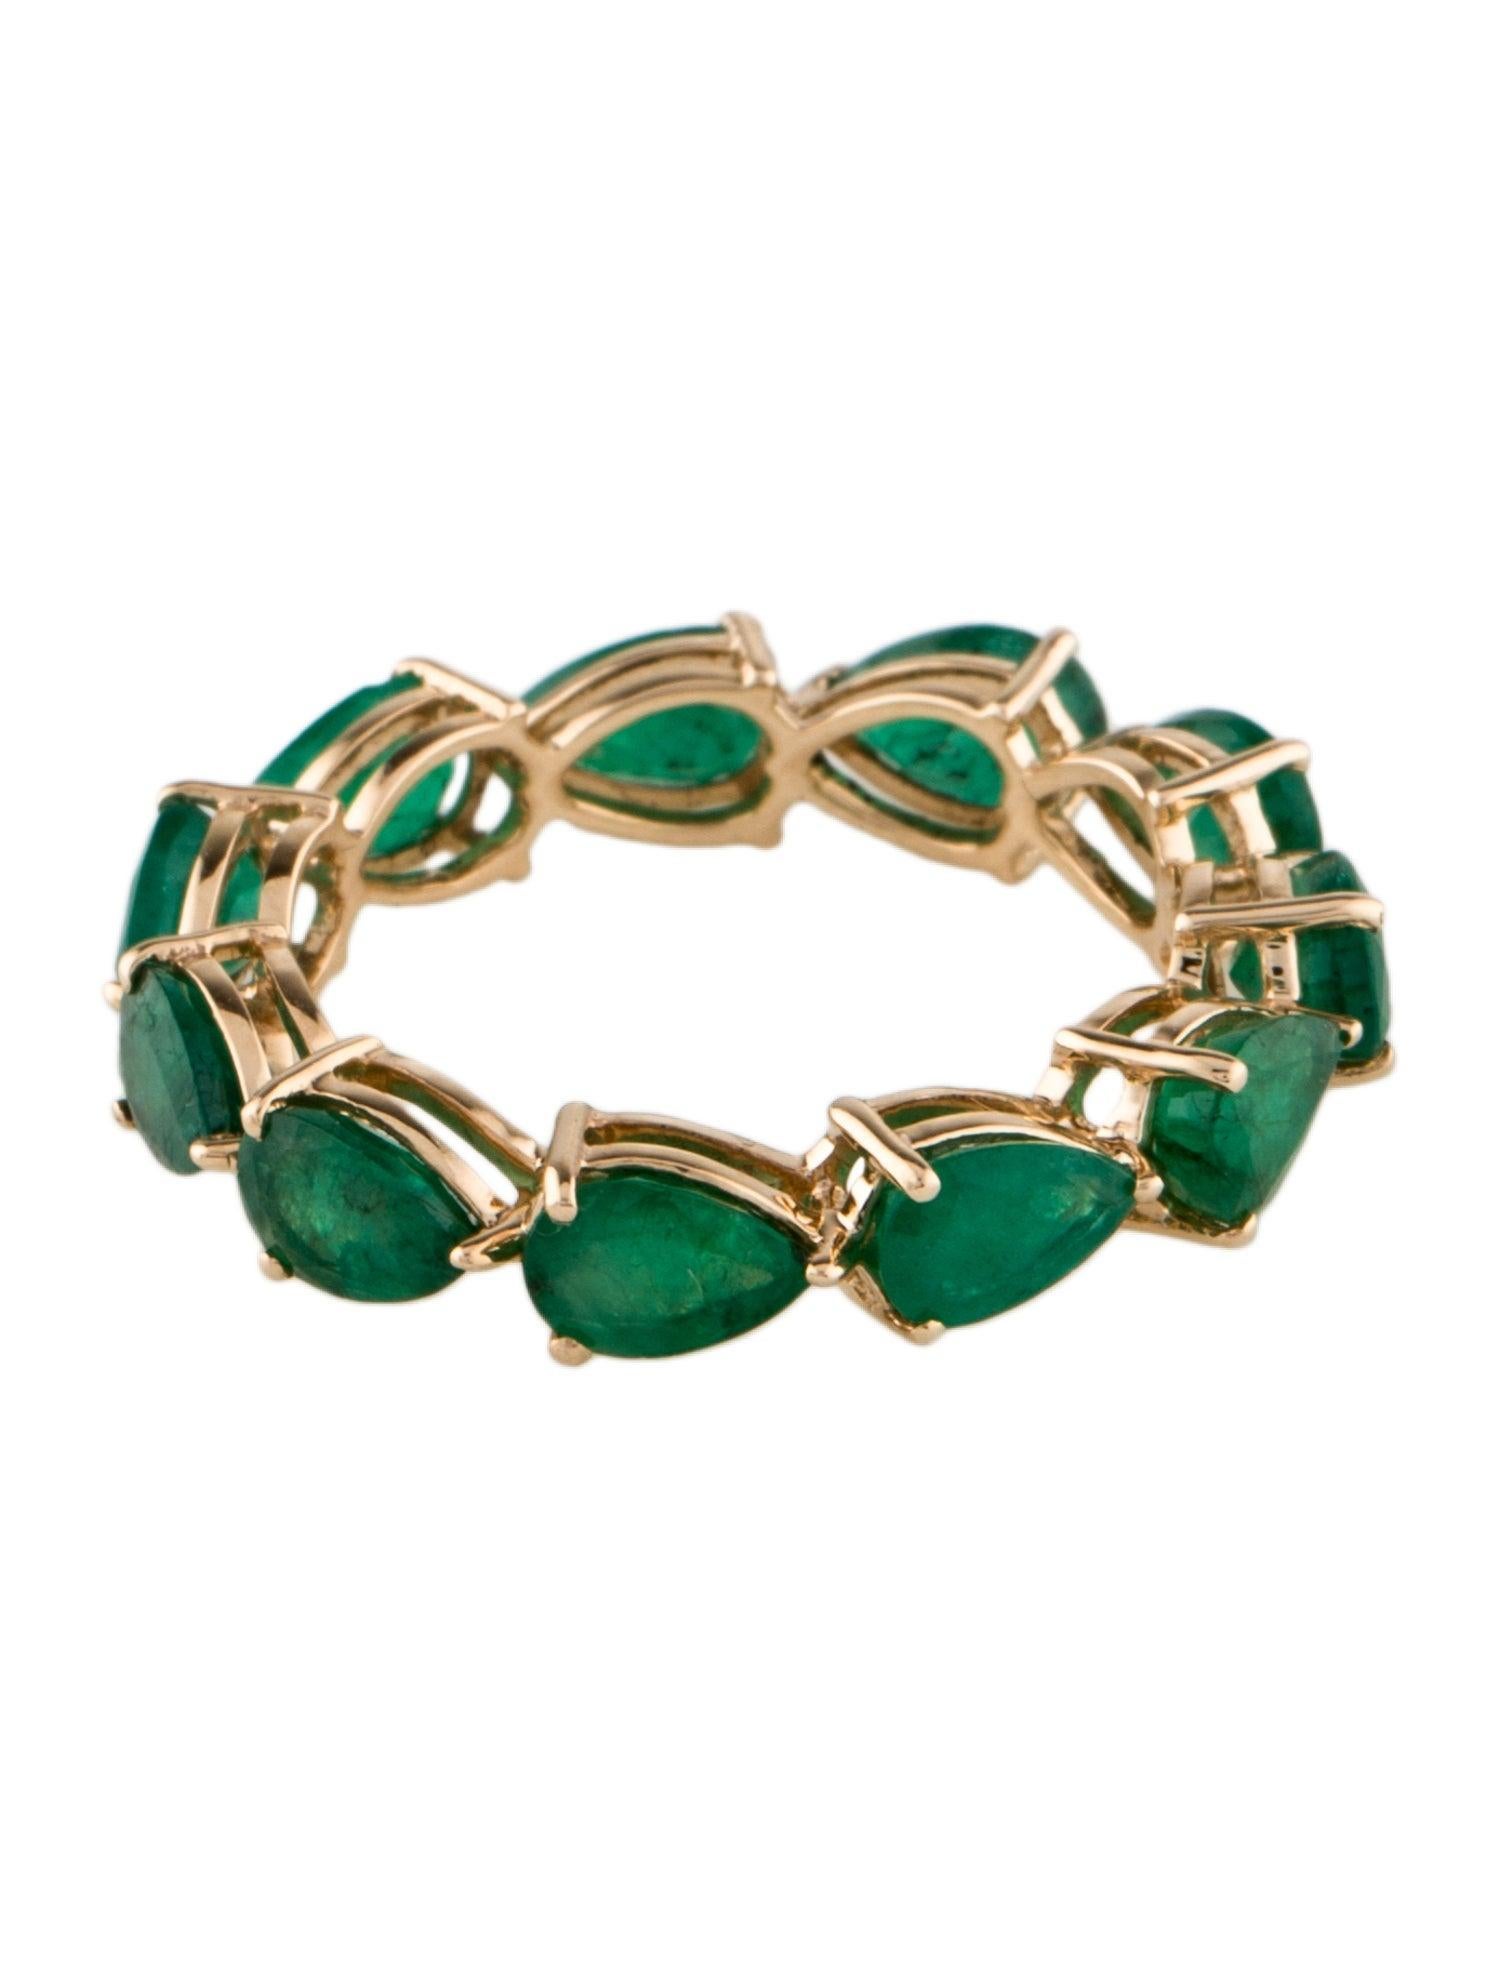 14K Yellow Gold 4.16ctw Pear Modified Brilliant Emerald Eternity Band, Size 8 In New Condition For Sale In Holtsville, NY